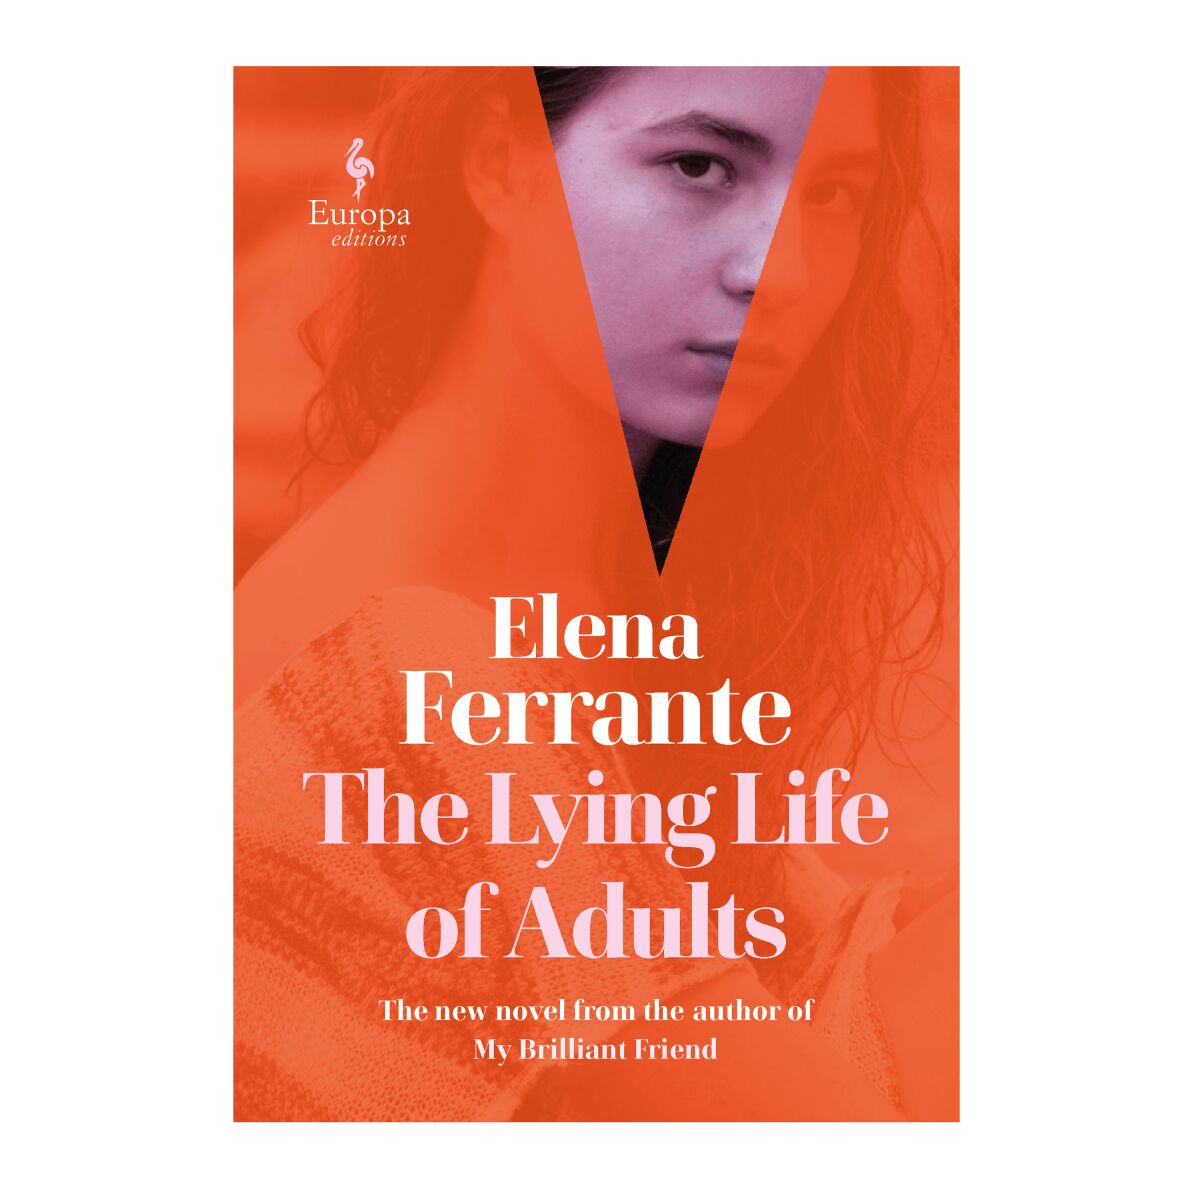 HOLIDAY GIFT GUIDE - Cover of the book The Lying Life of Adults by Elena Ferrante.